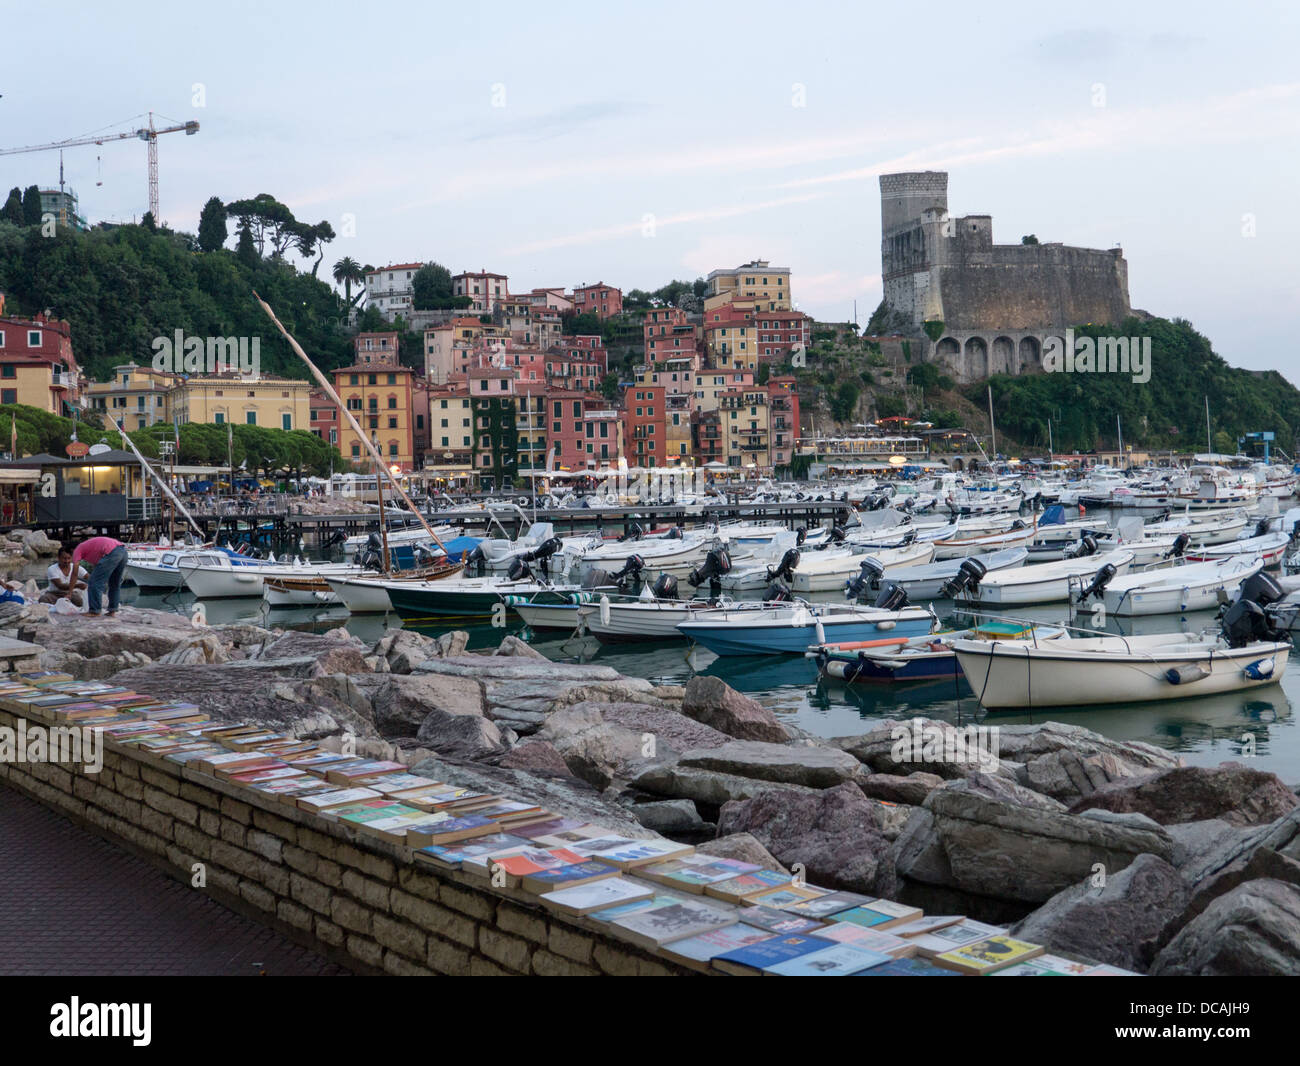 Boats in the harbour, with books and rocks in the foreground and a castle in the background, Lerici, La Spezia, Italy Stock Photo